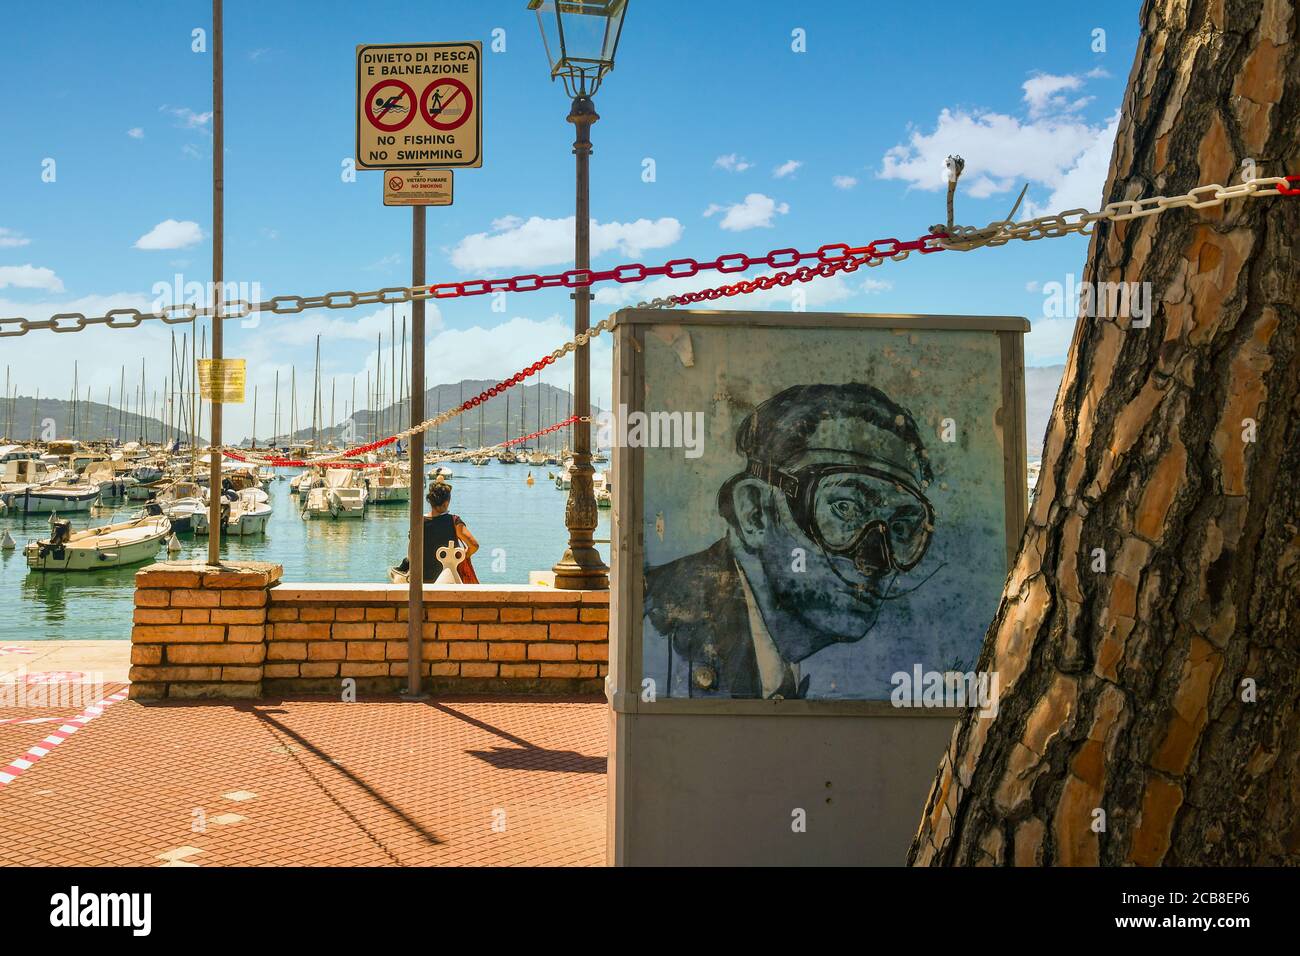 An artwork by the street artist Blub inspired by a portrait of Salvador Dalì on the seaside promenade of the harbor, Lerici, La Spezia, Liguria, Italy Stock Photo